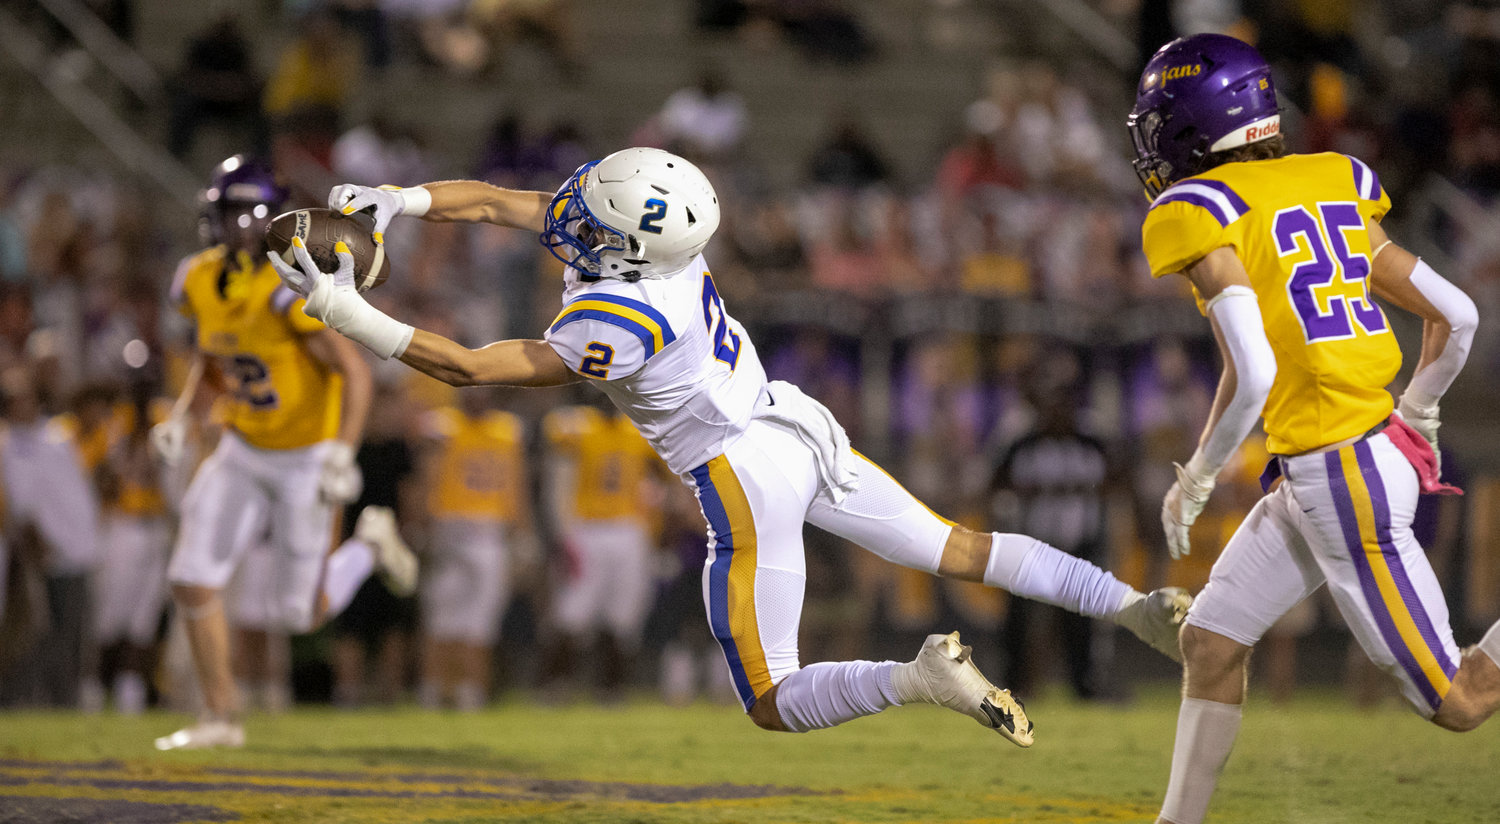 Fairhope senior Ben Moseley extends to haul in a pass from Caden Creel during the Pirates’ Class 7A Region 1 contest against the Daphne Trojans at Jubilee Stadium Oct. 7. Moseley was an all-state honorable mention by the Alabama Sports Writers Association as one of two Pirates recognized.